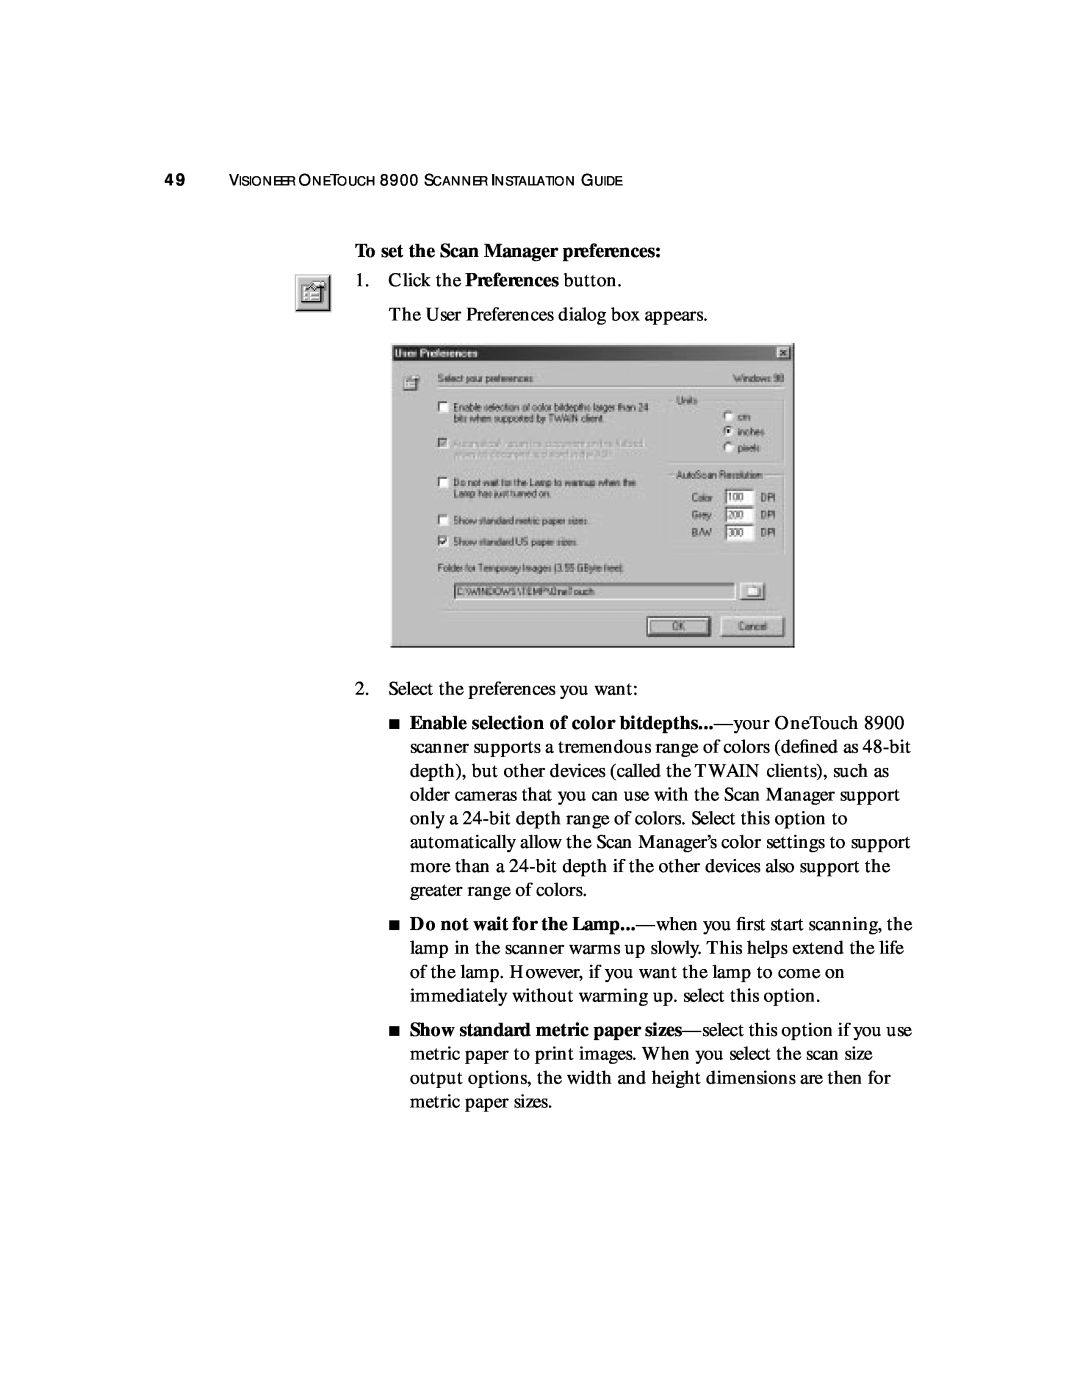 Visioneer 8900 manual To set the Scan Manager preferences 